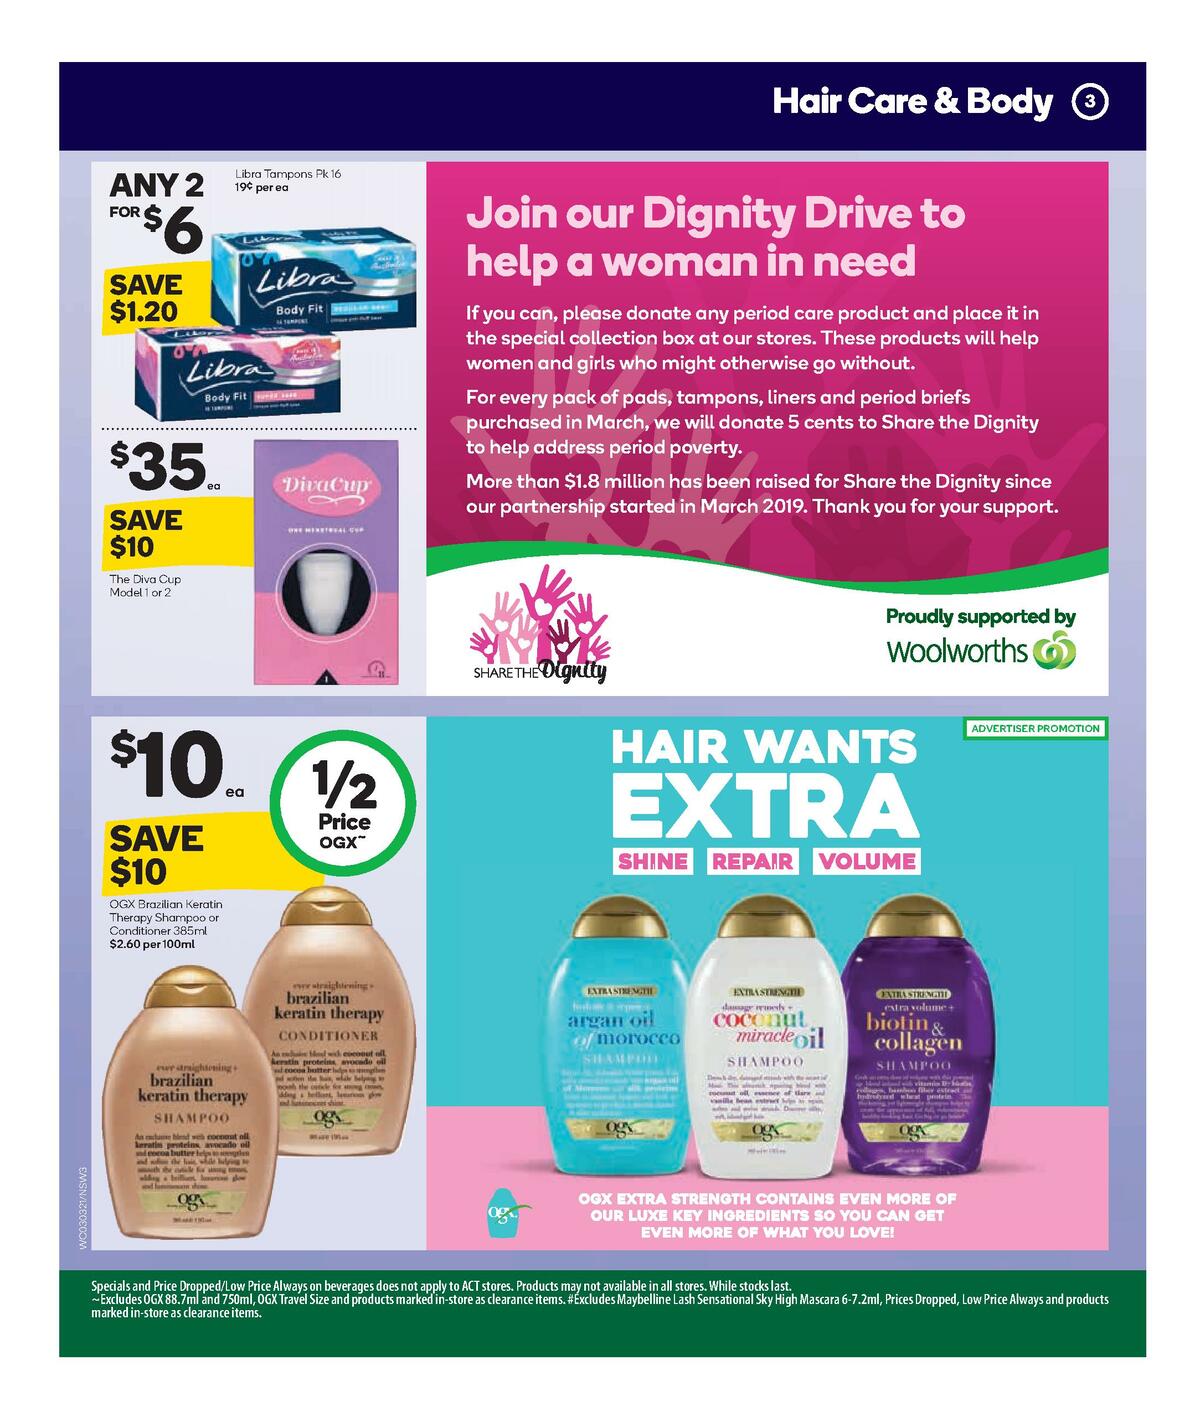 Woolworths Health & Beauty Catalogues from 3 March